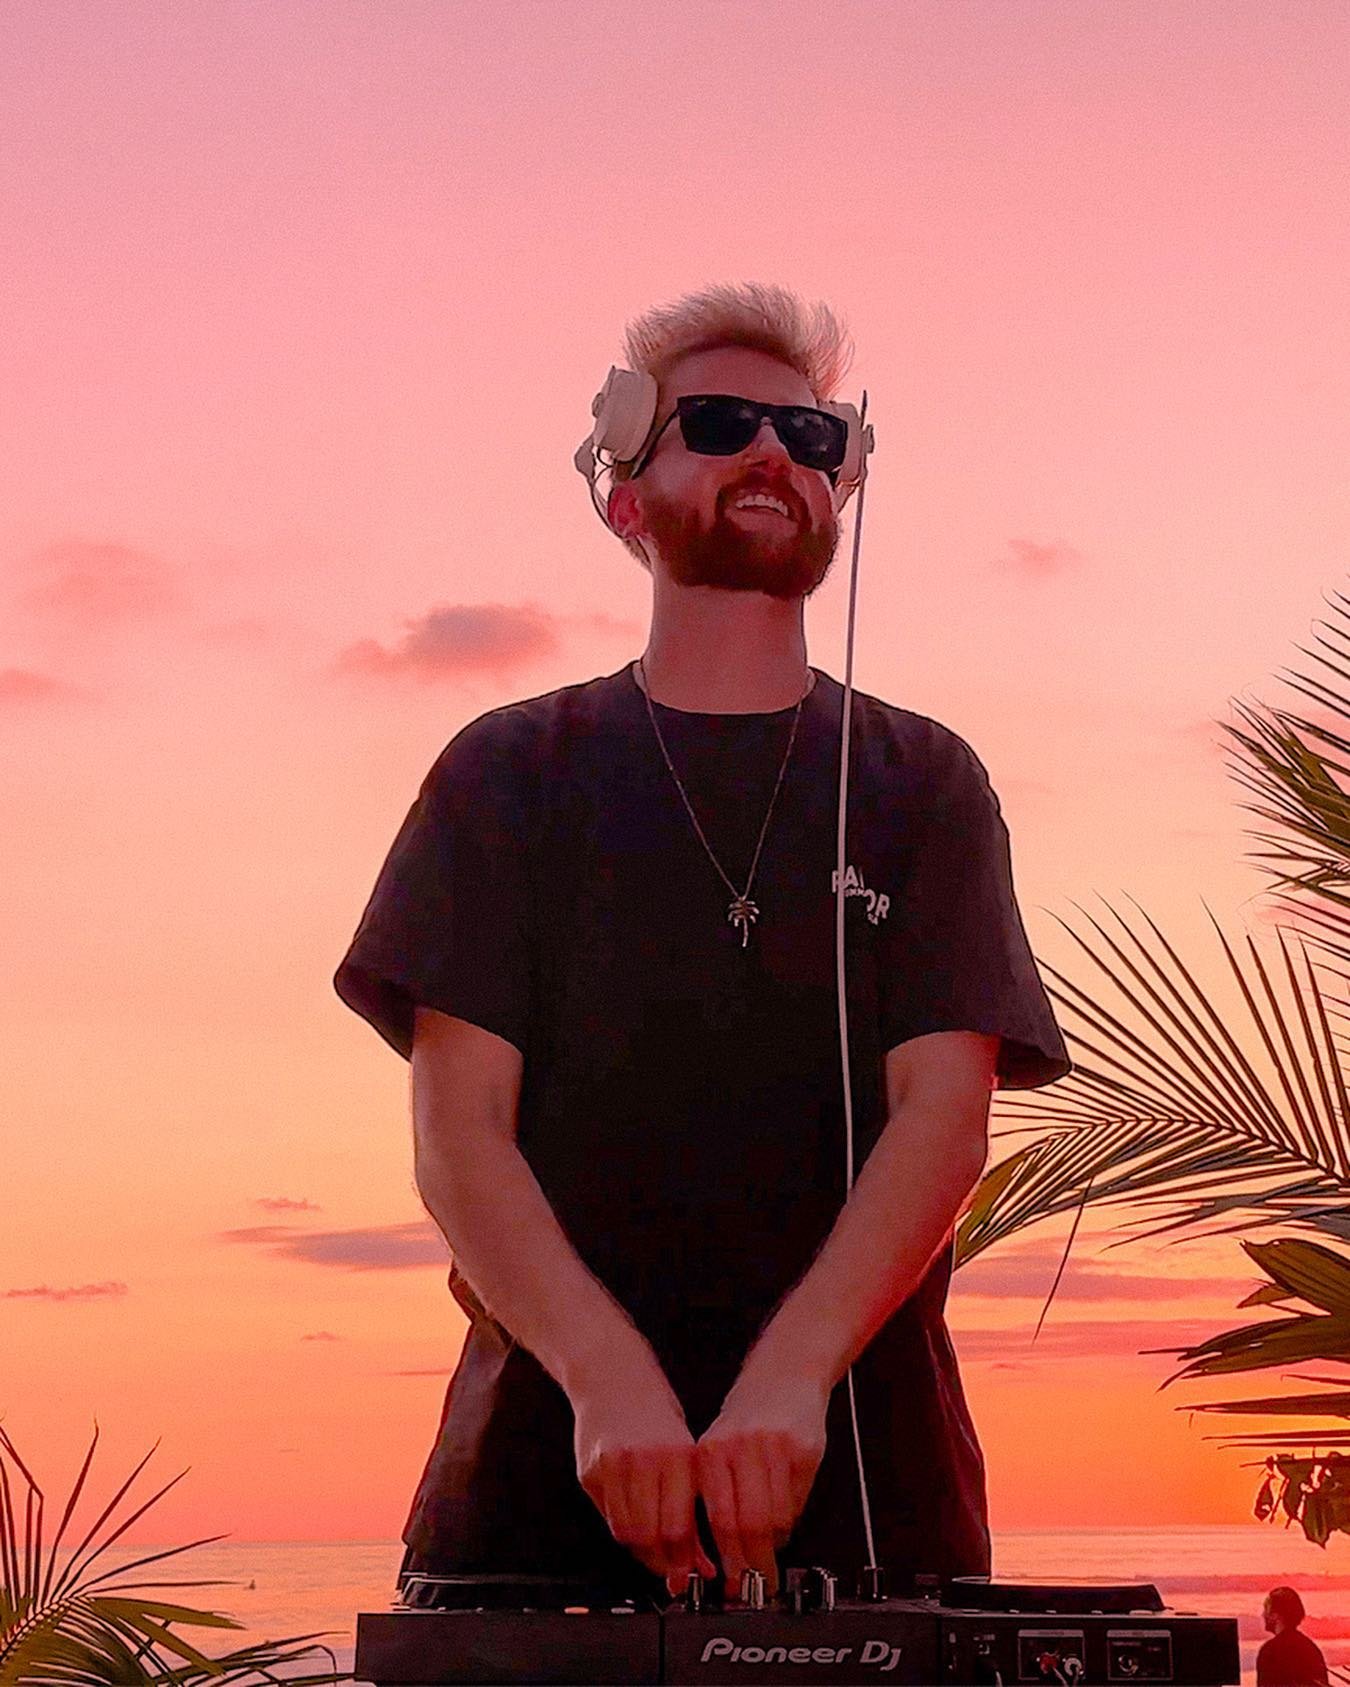 new costa rica summer vibes mix out now 🌴🌅
watch now on my youtube + link in my bio ❤️